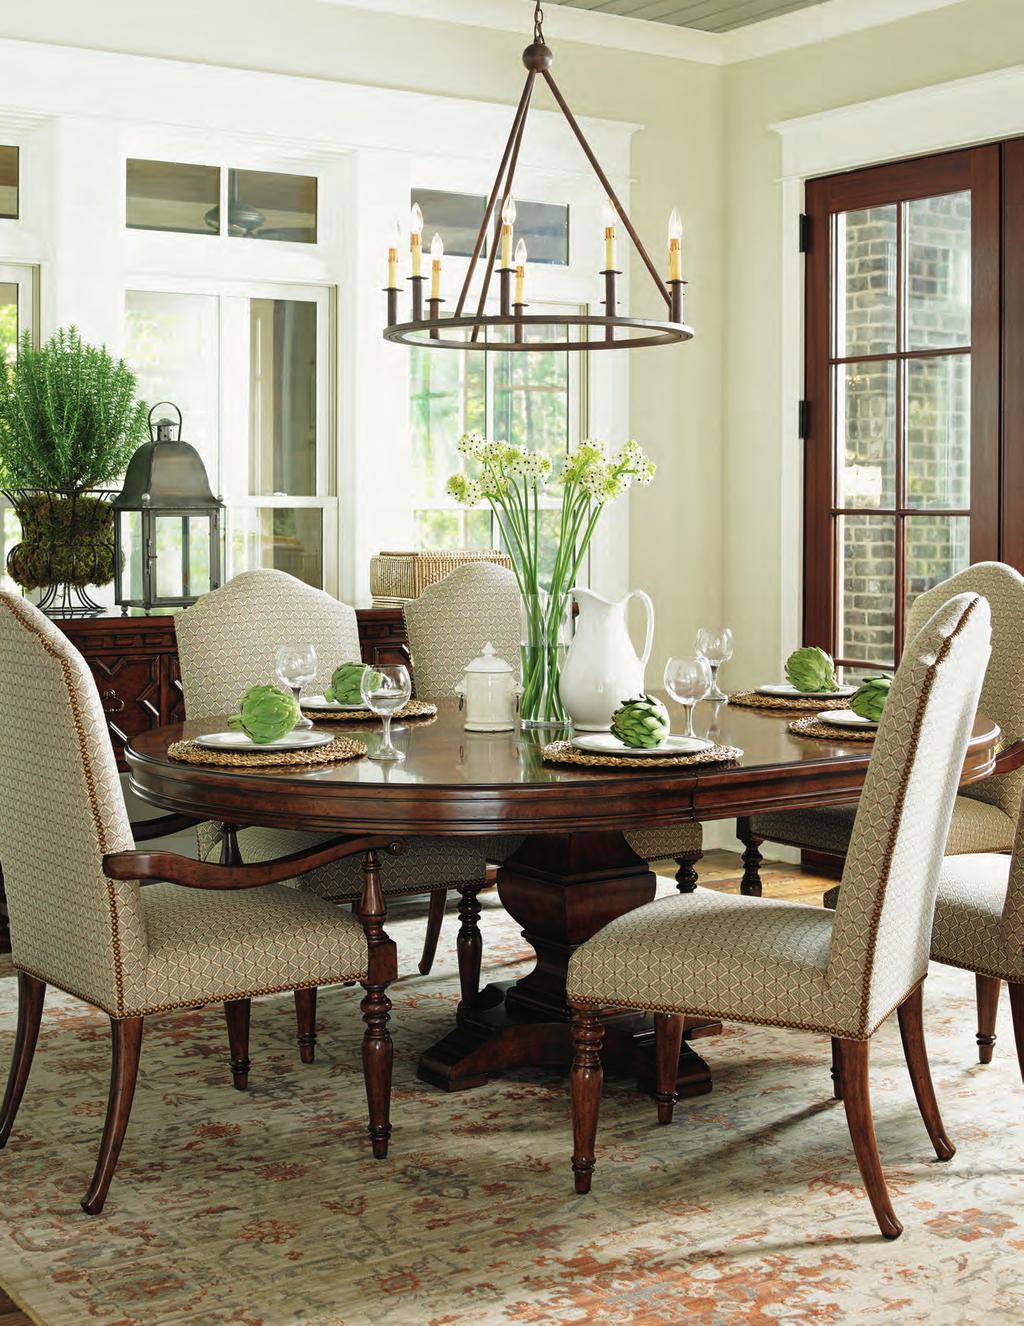 The 60-inch Ridgeview dining table features a four-way matched pattern of